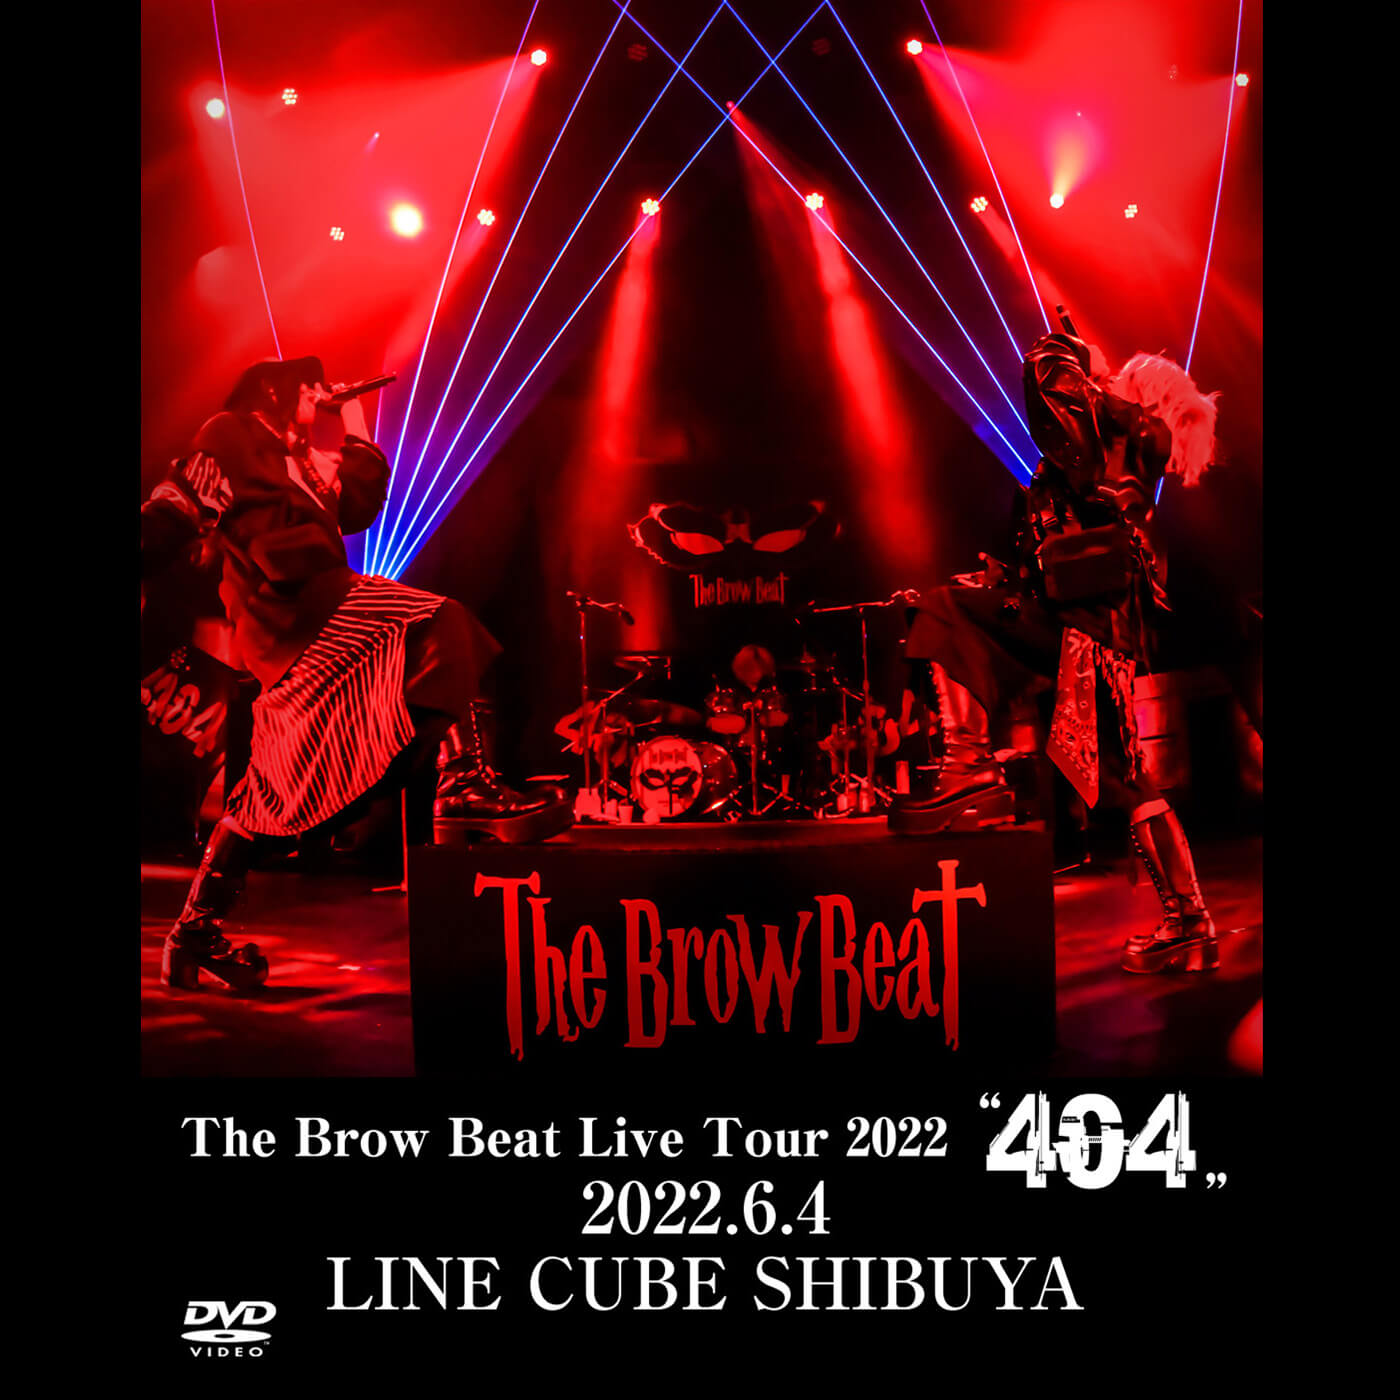 The Brow Beat discography | The Brow Beatディスコグラフィ | vkgy